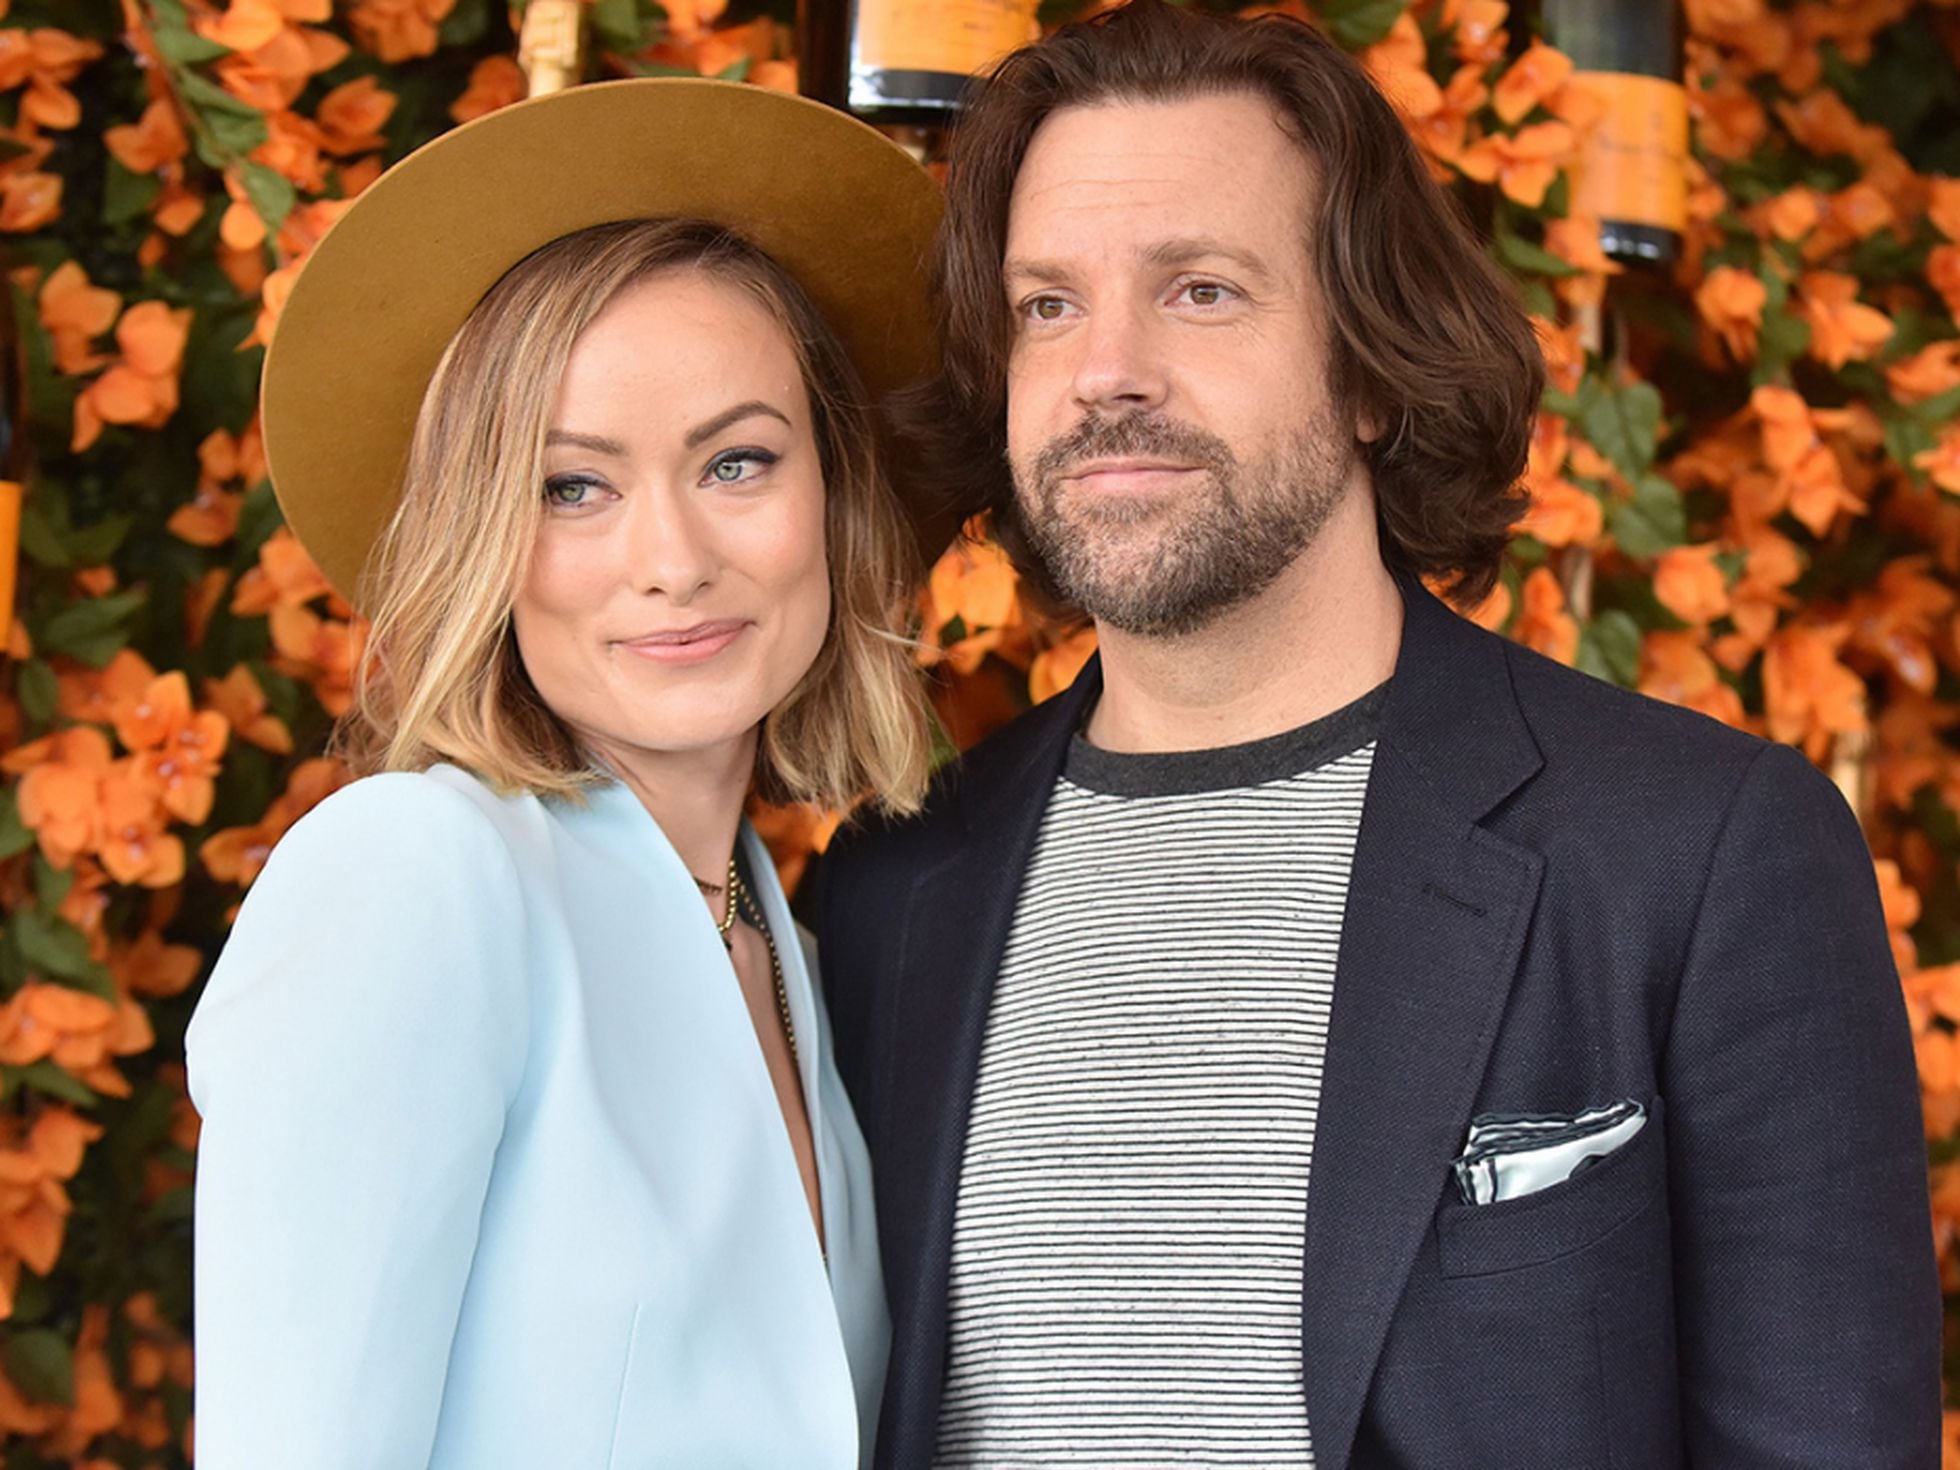 How Olivia Wilde met Jason Sudeikis (and why the Harry Styles affair rumors  are unfair) | Culture | EL PAÍS English Edition